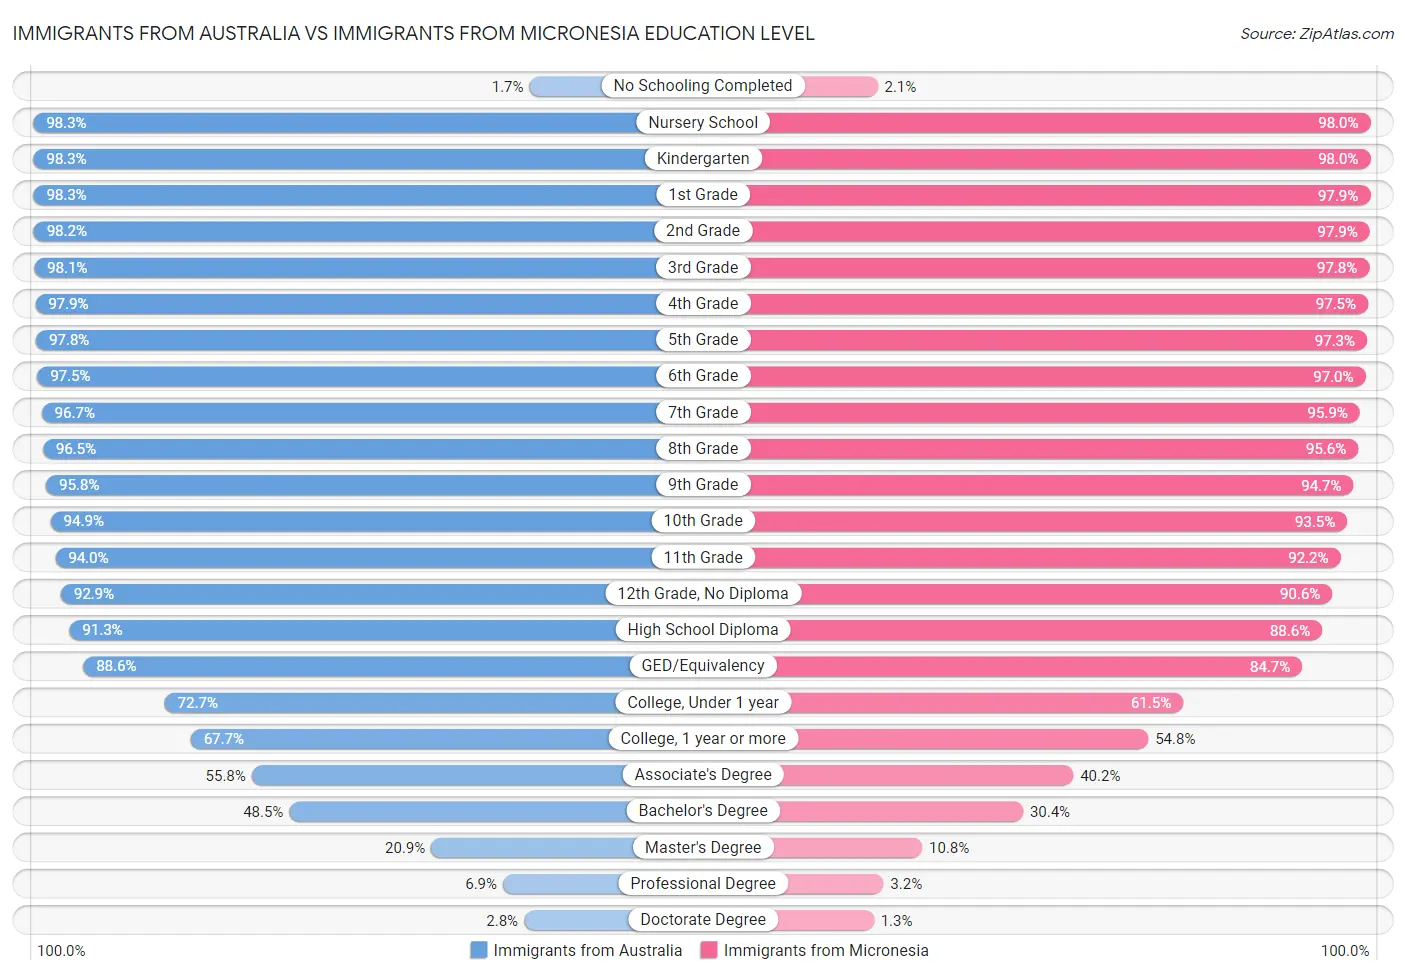 Immigrants from Australia vs Immigrants from Micronesia Education Level